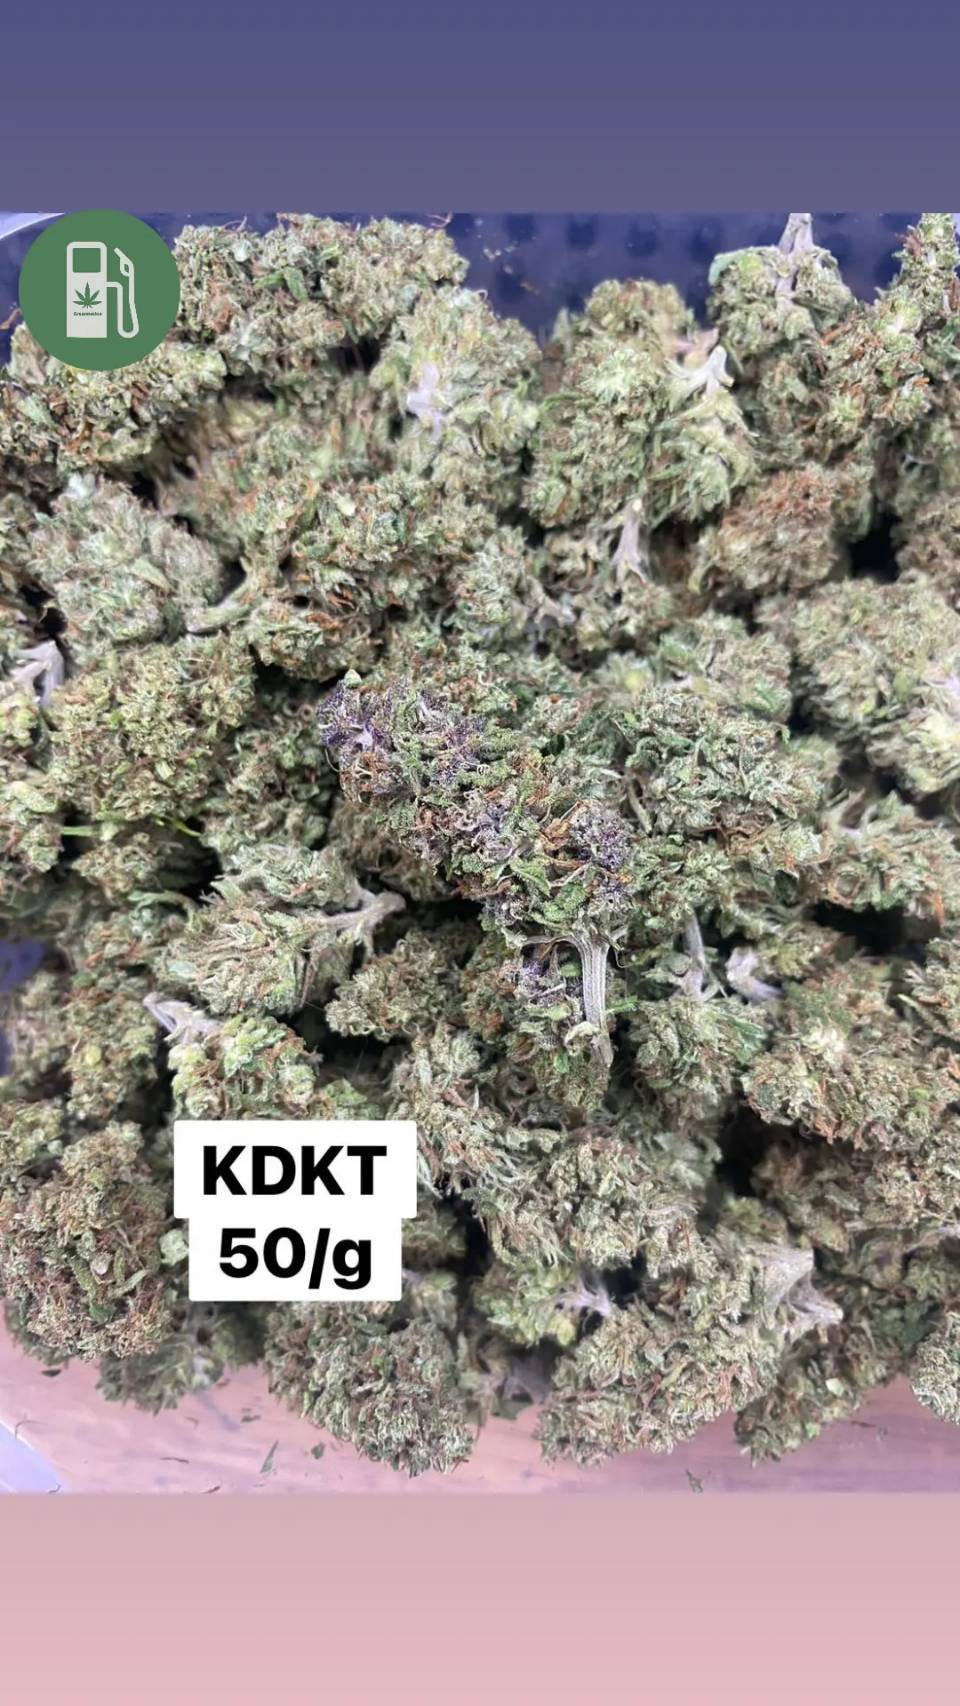 Product Image for KDKT